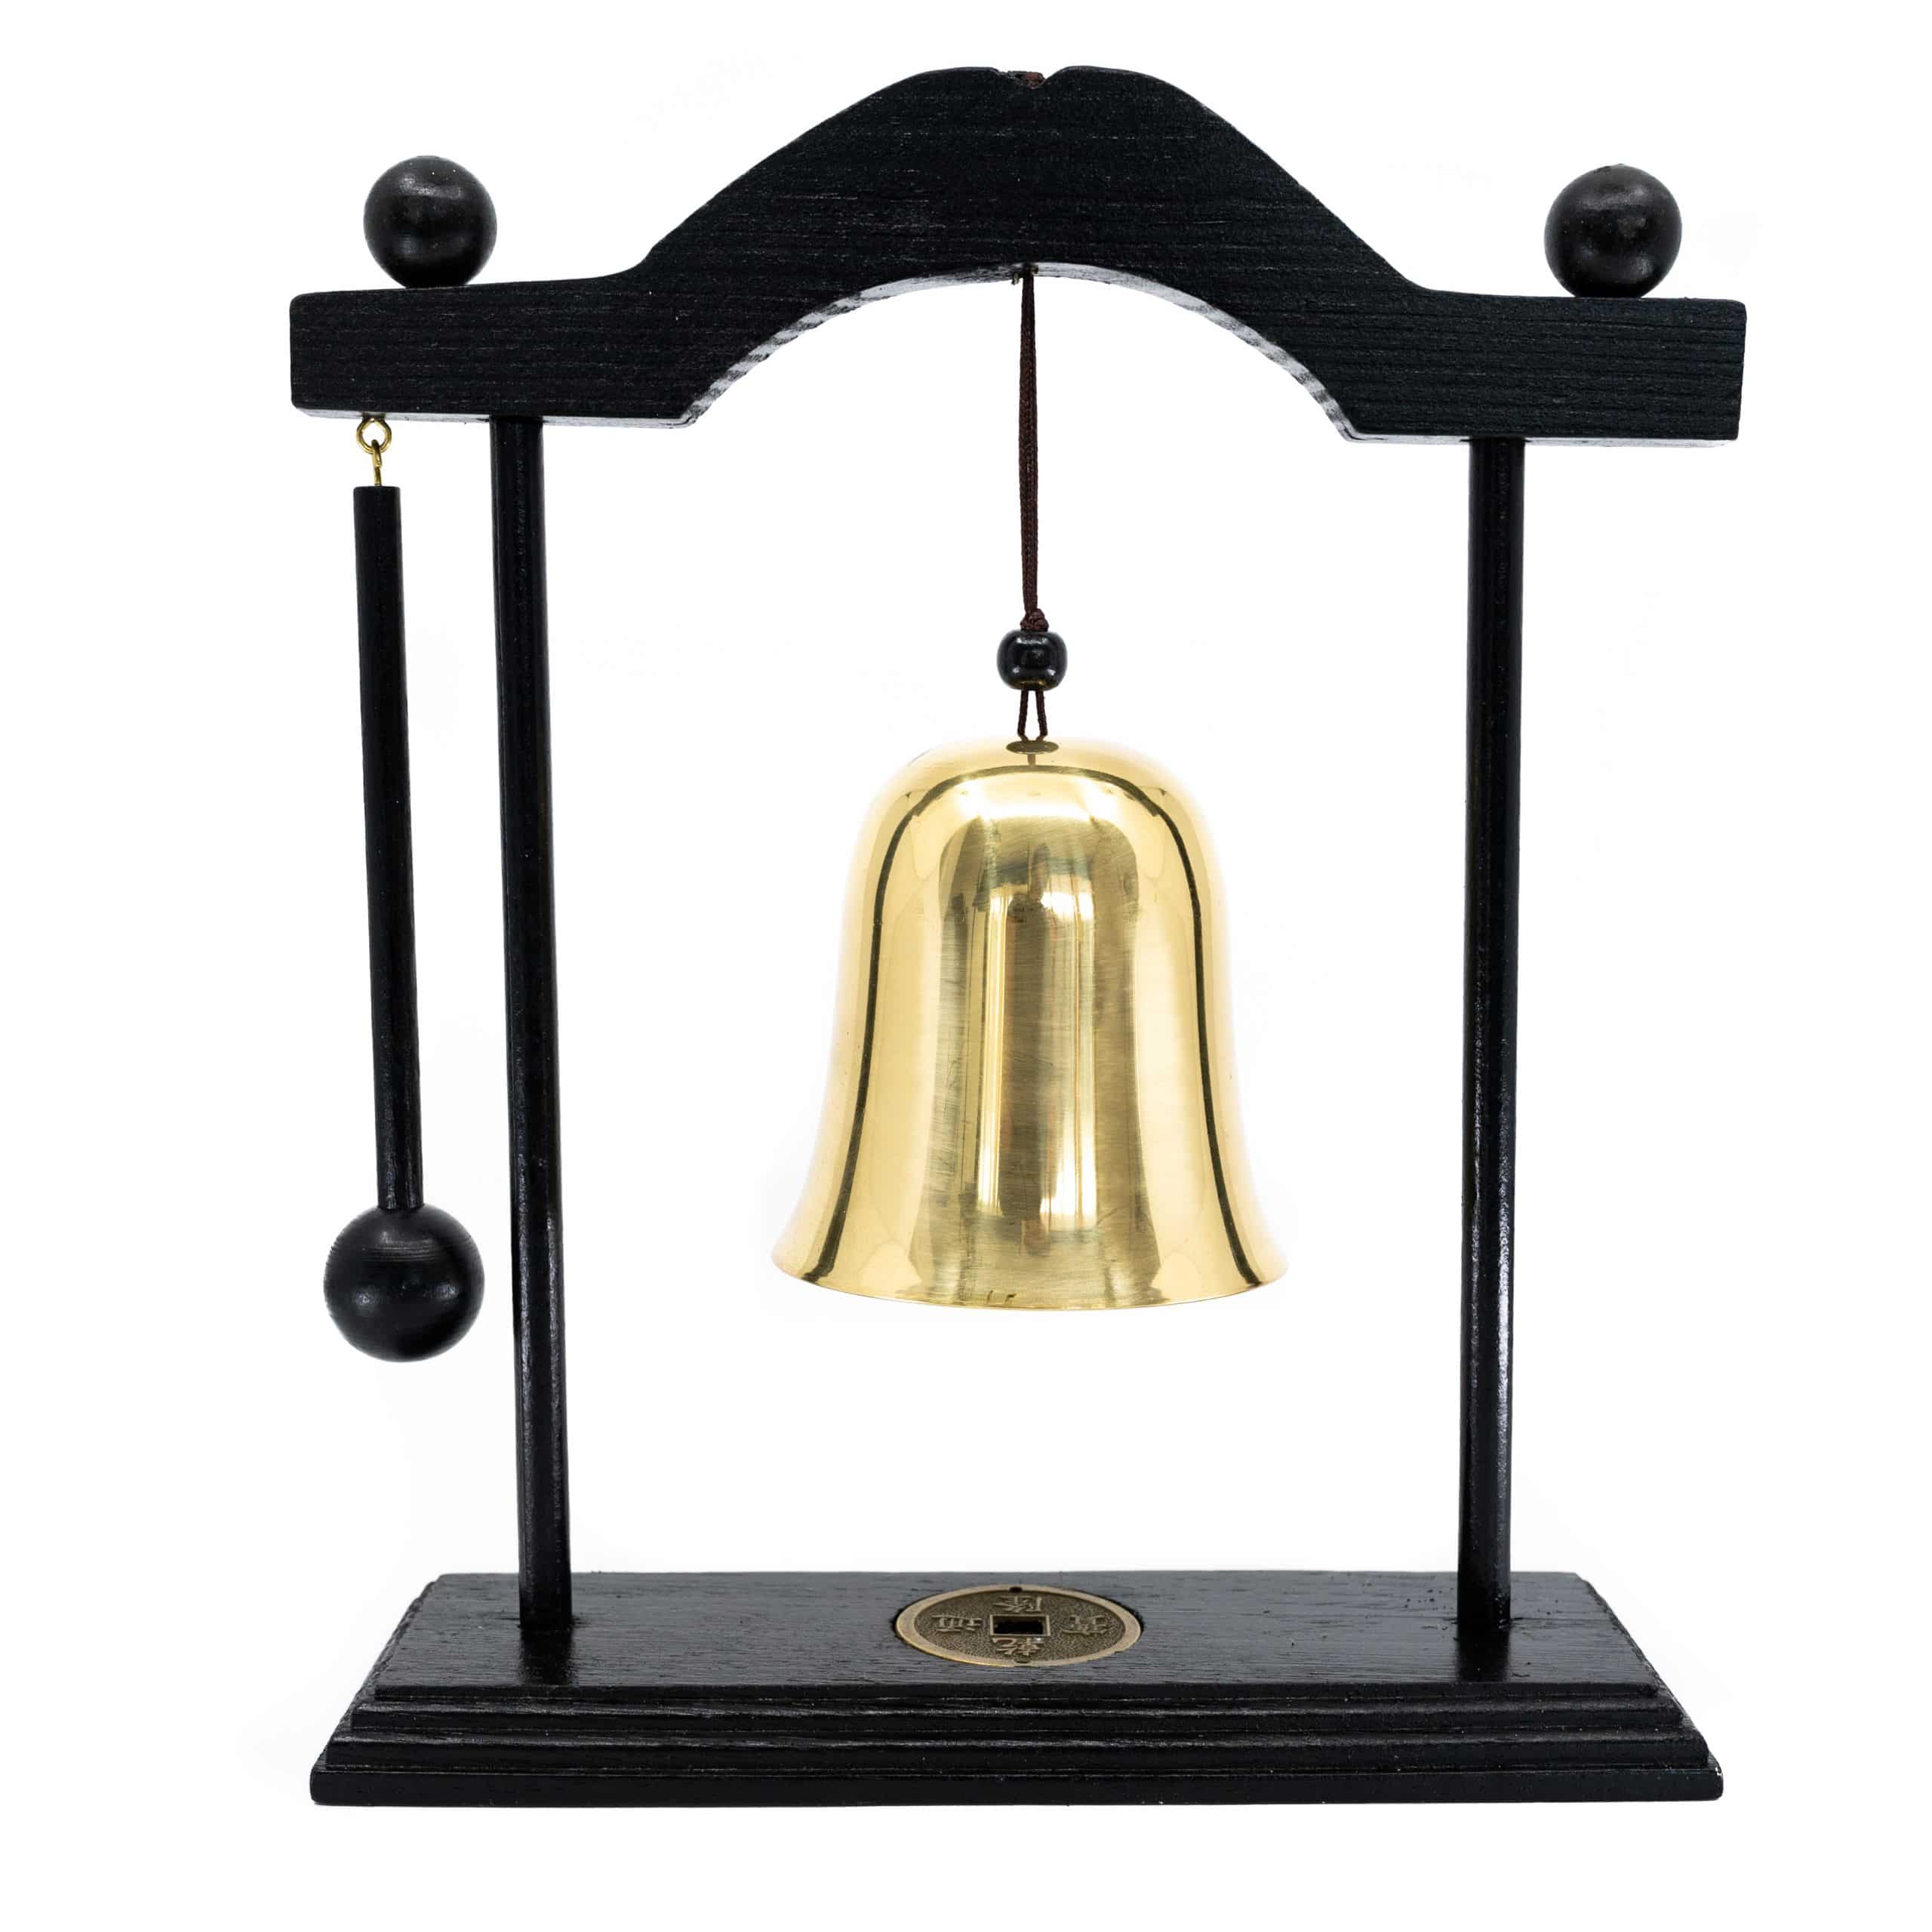 Feng Shui Table Gong Bell with Mallet and Black Frame (25 cm)